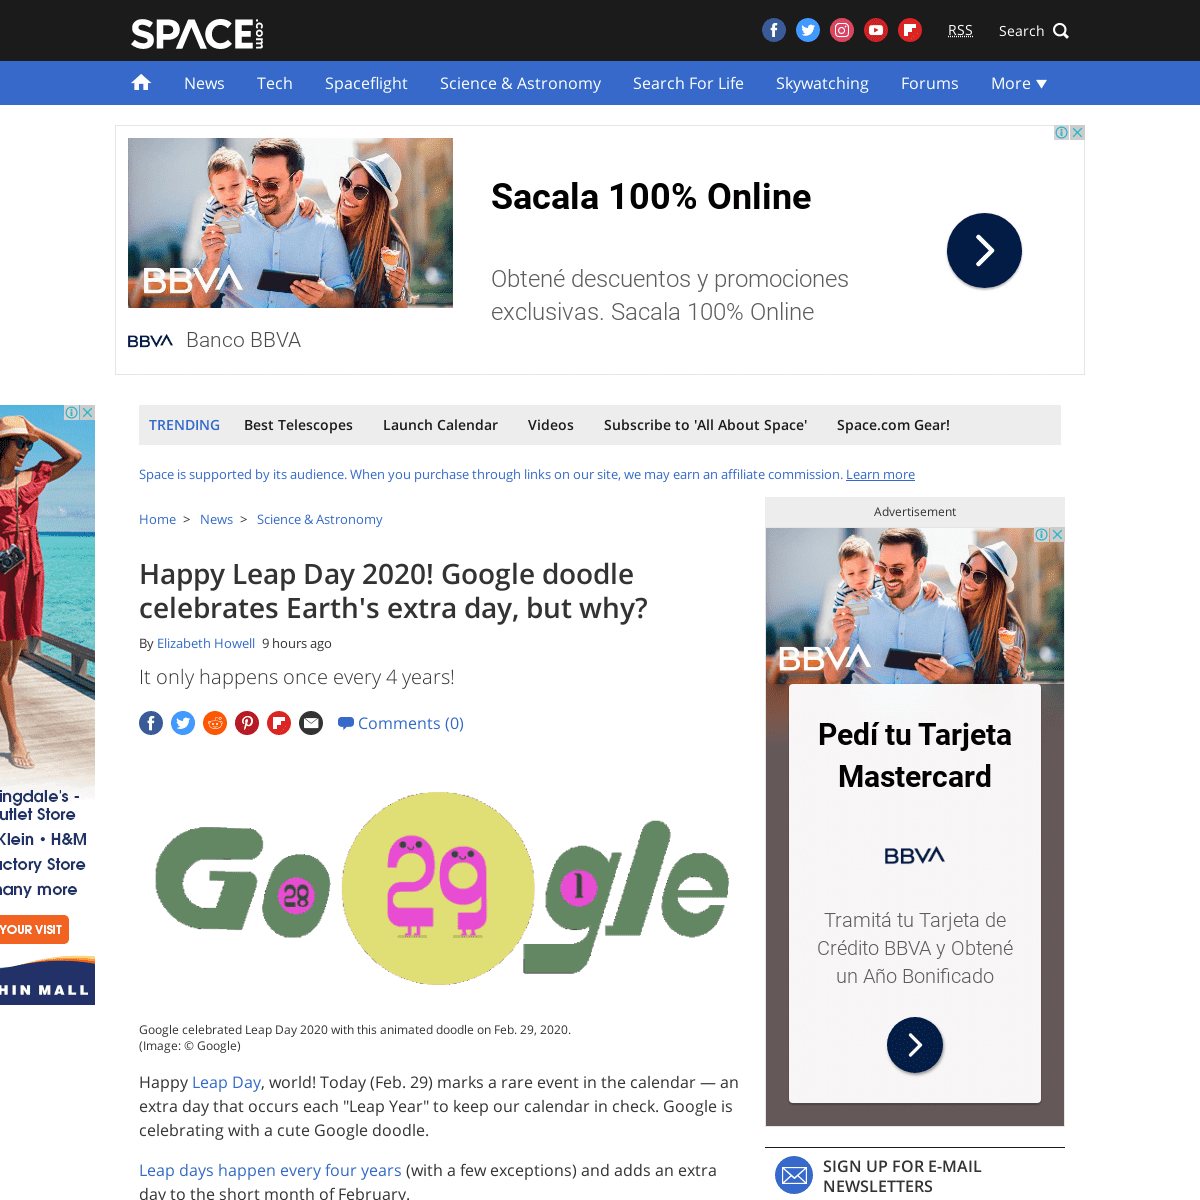 A complete backup of www.space.com/leap-day-2020-google-doodle-leap-year-explained.html